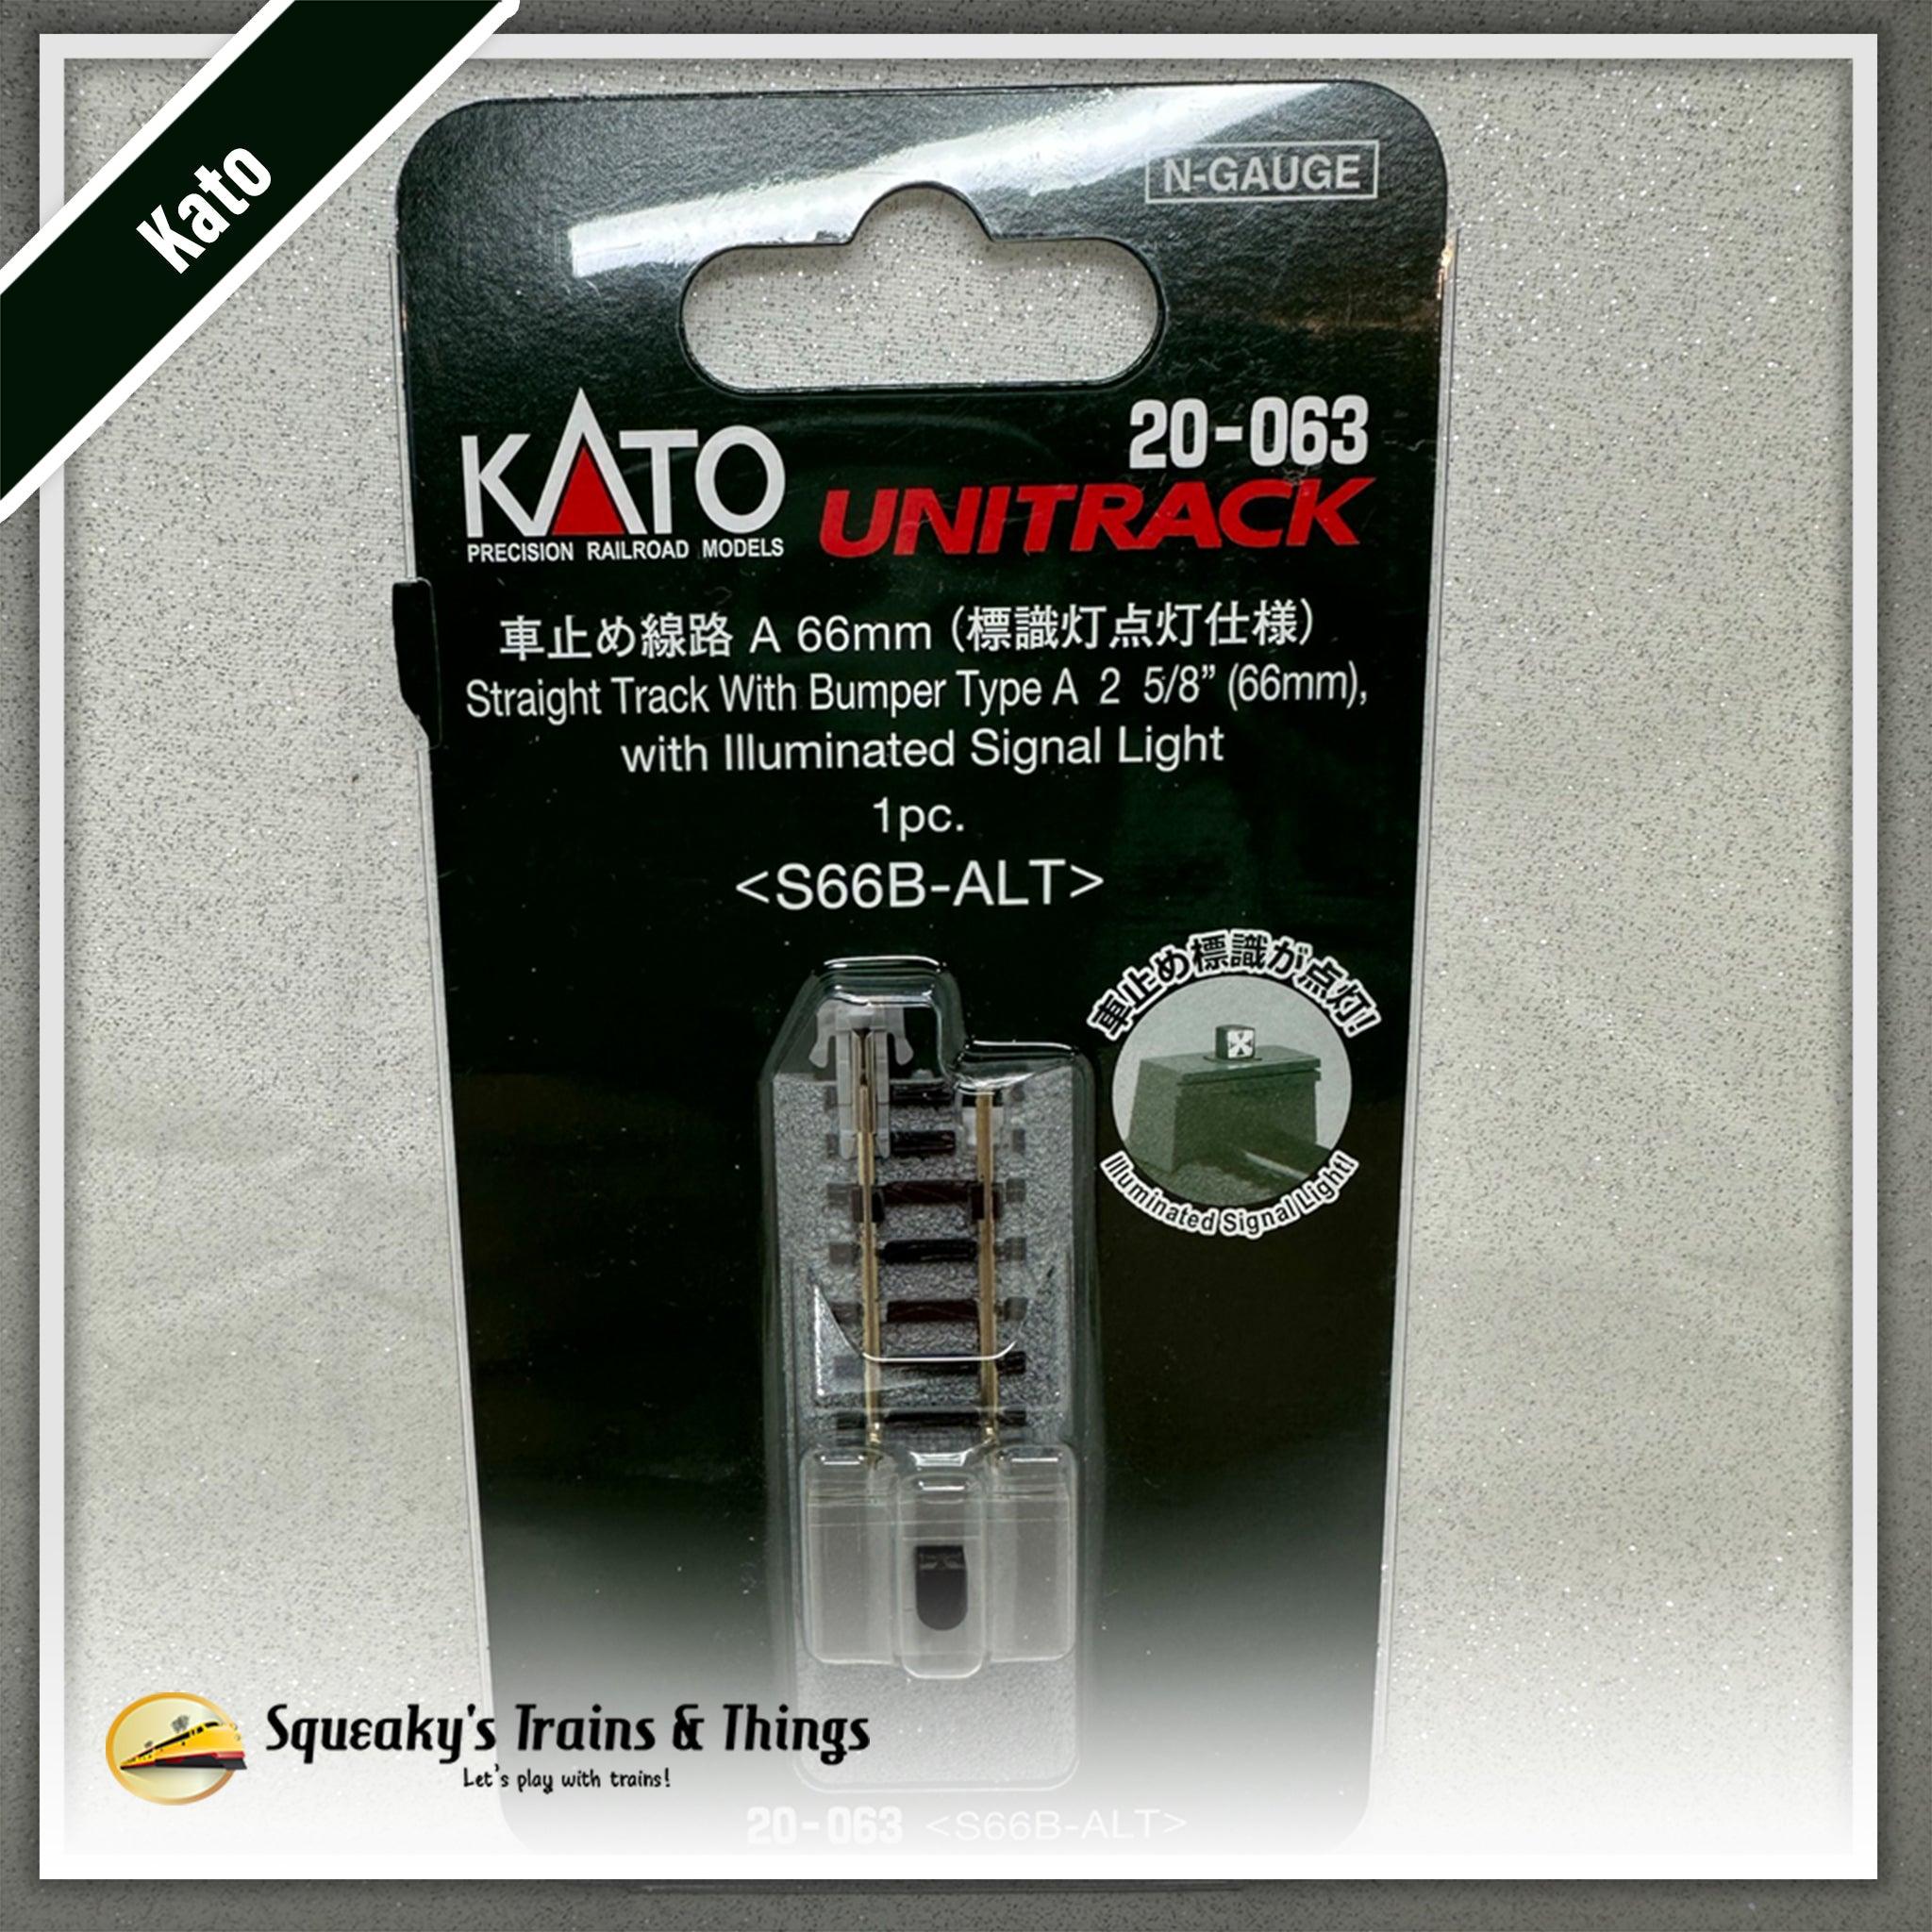 Kato 20-063 | Unitrack 66mm (2 5/6") Straight Track Type A with Illuminated Bumper | N Scale